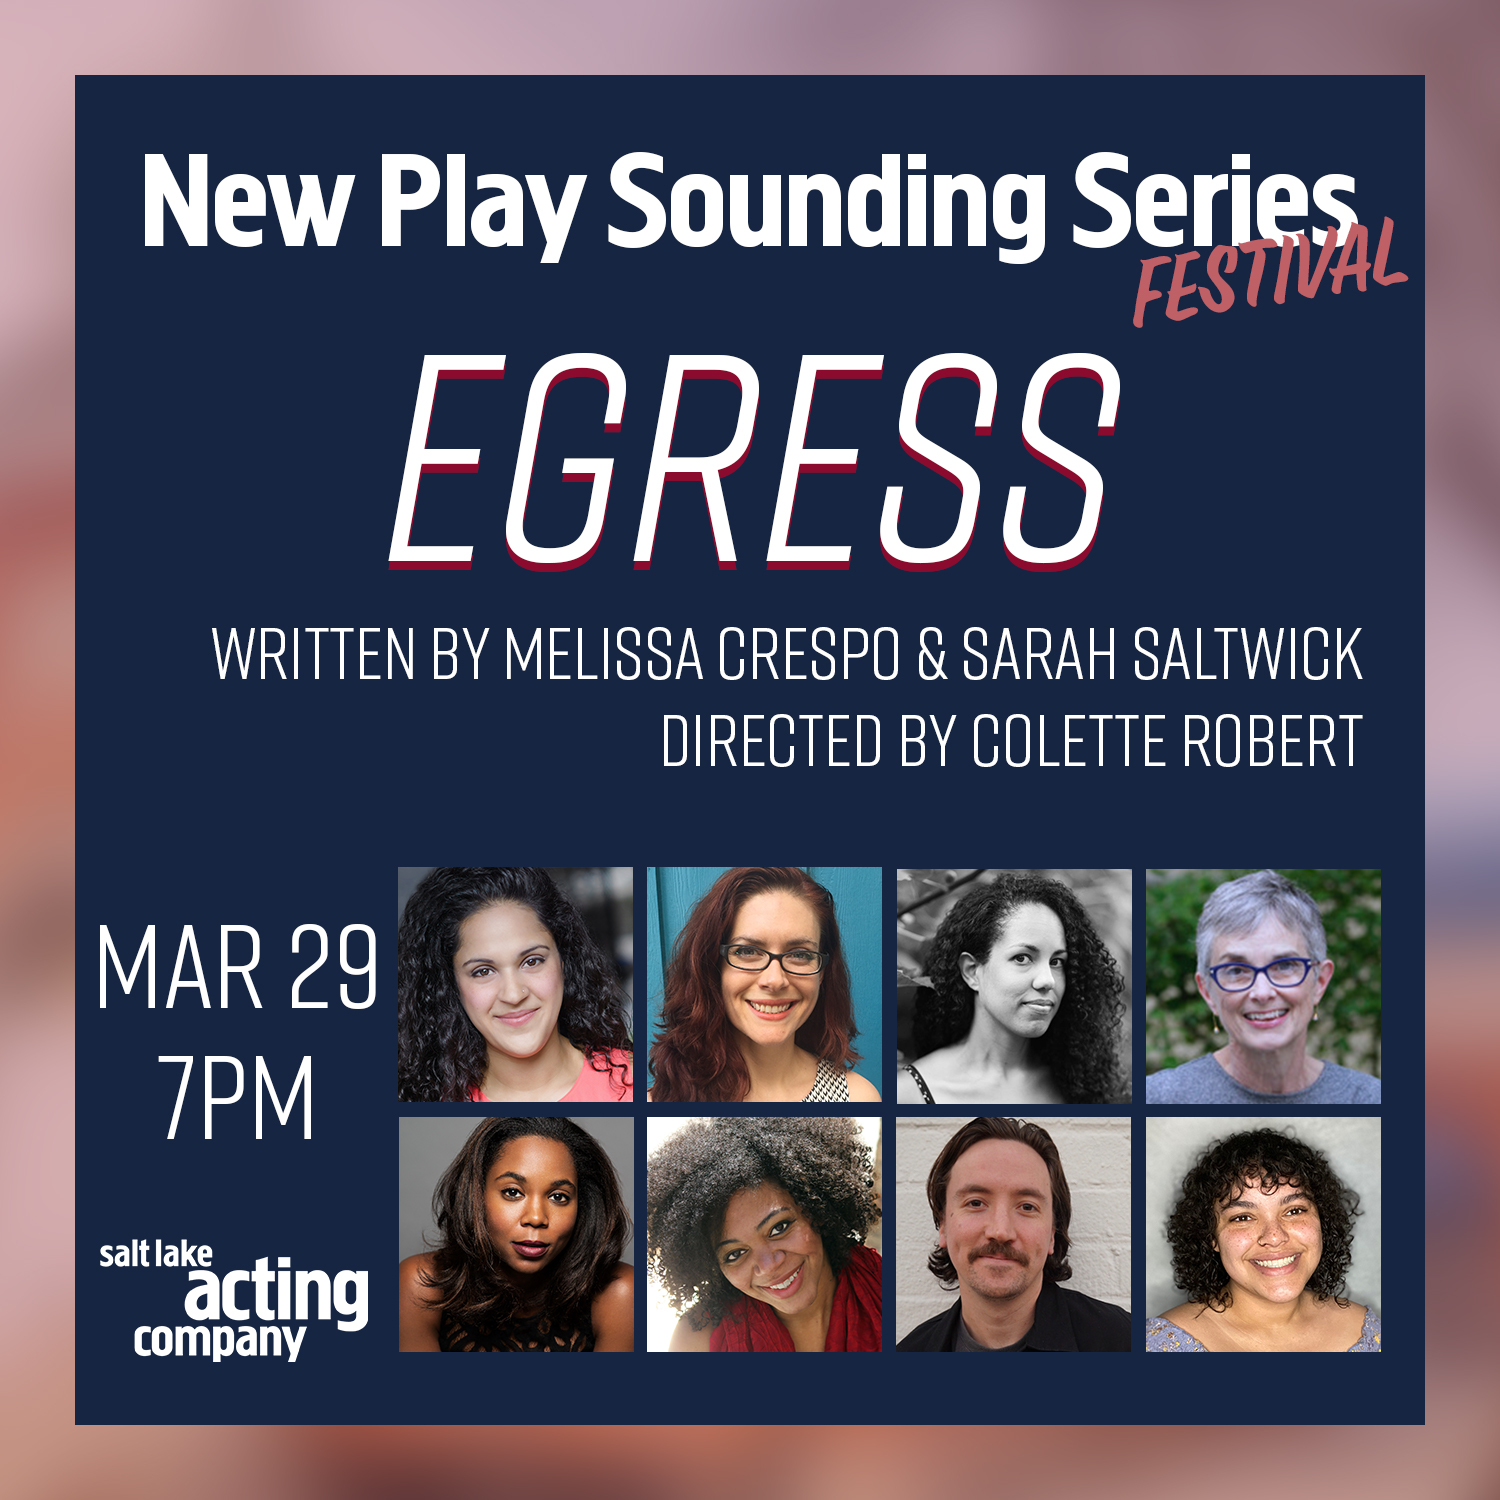 A promotional image featuring eight headshots of the cast, director, dramaturg, and playwrights of EGRESS